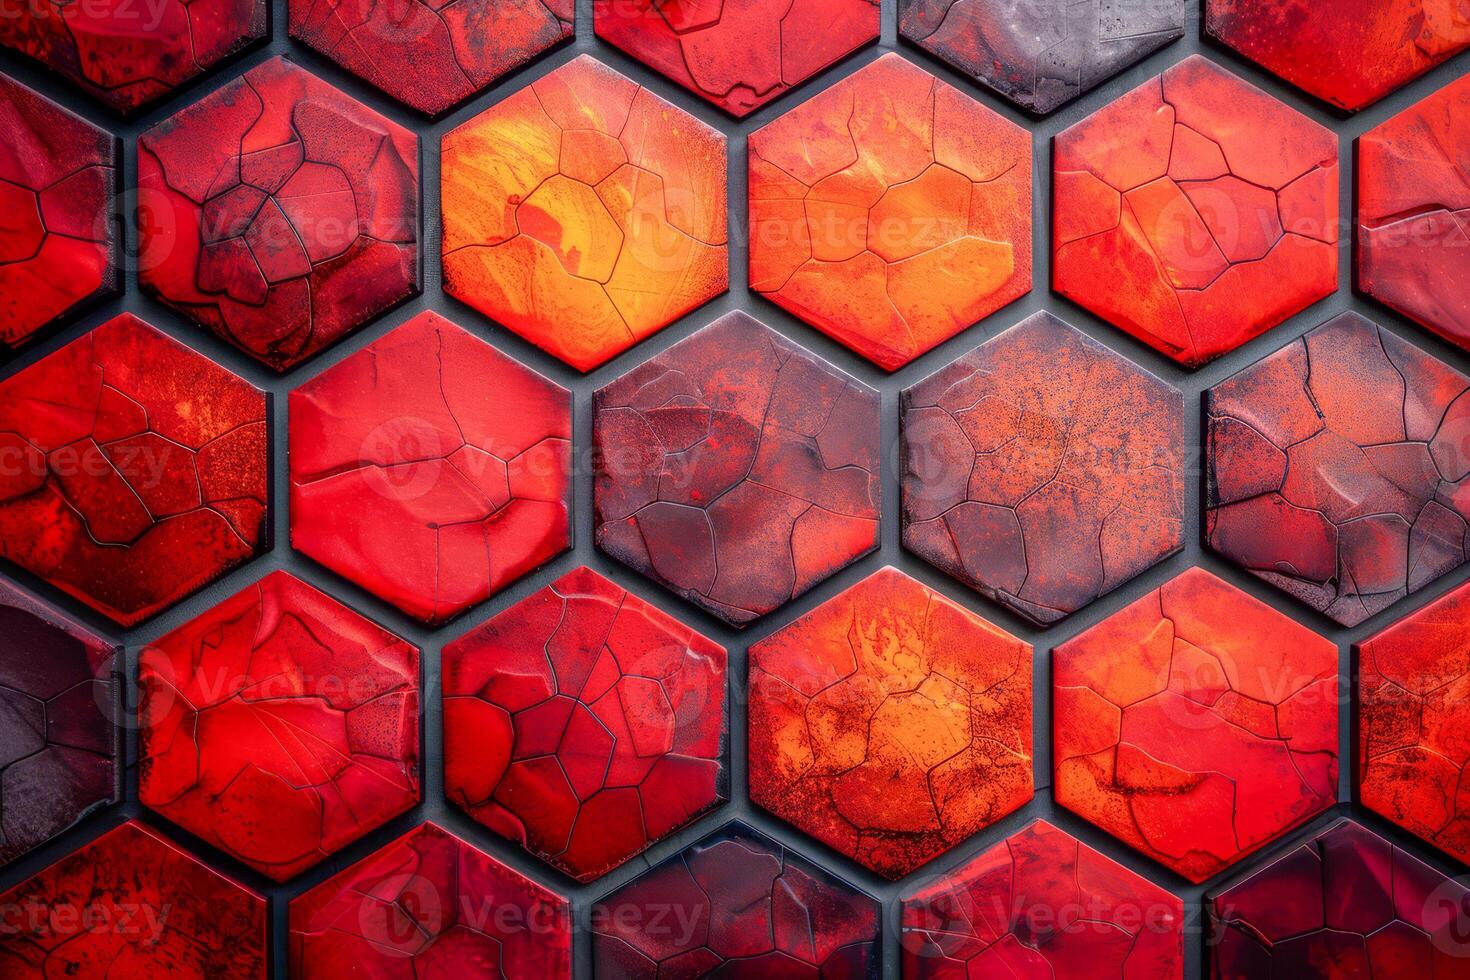 Cracked Lava Hexagon Tiles in Fiery Red and Black Tones photo